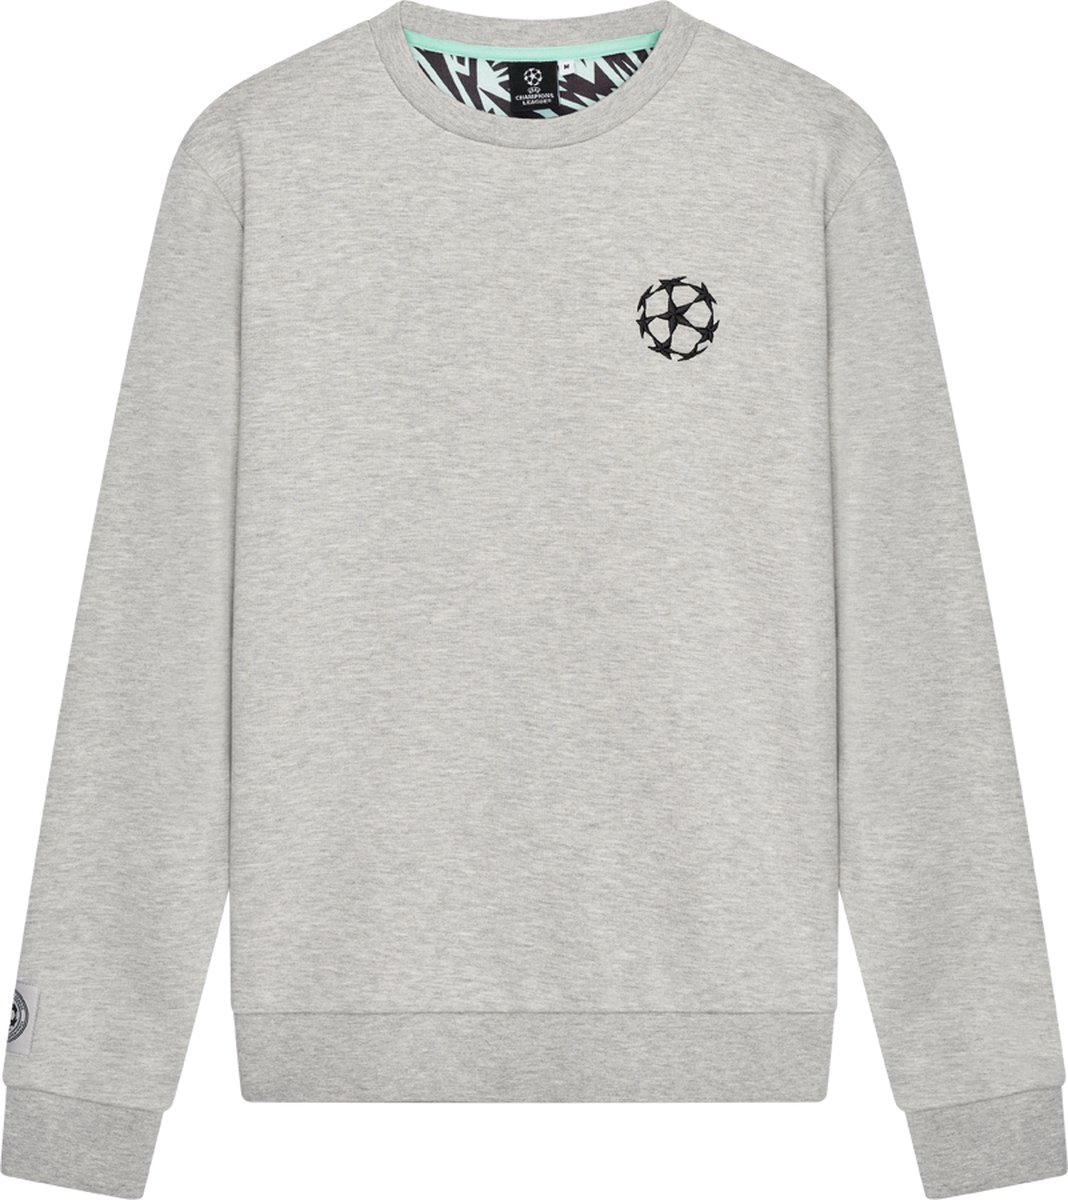 Champions League lifestyle sweater - maat S